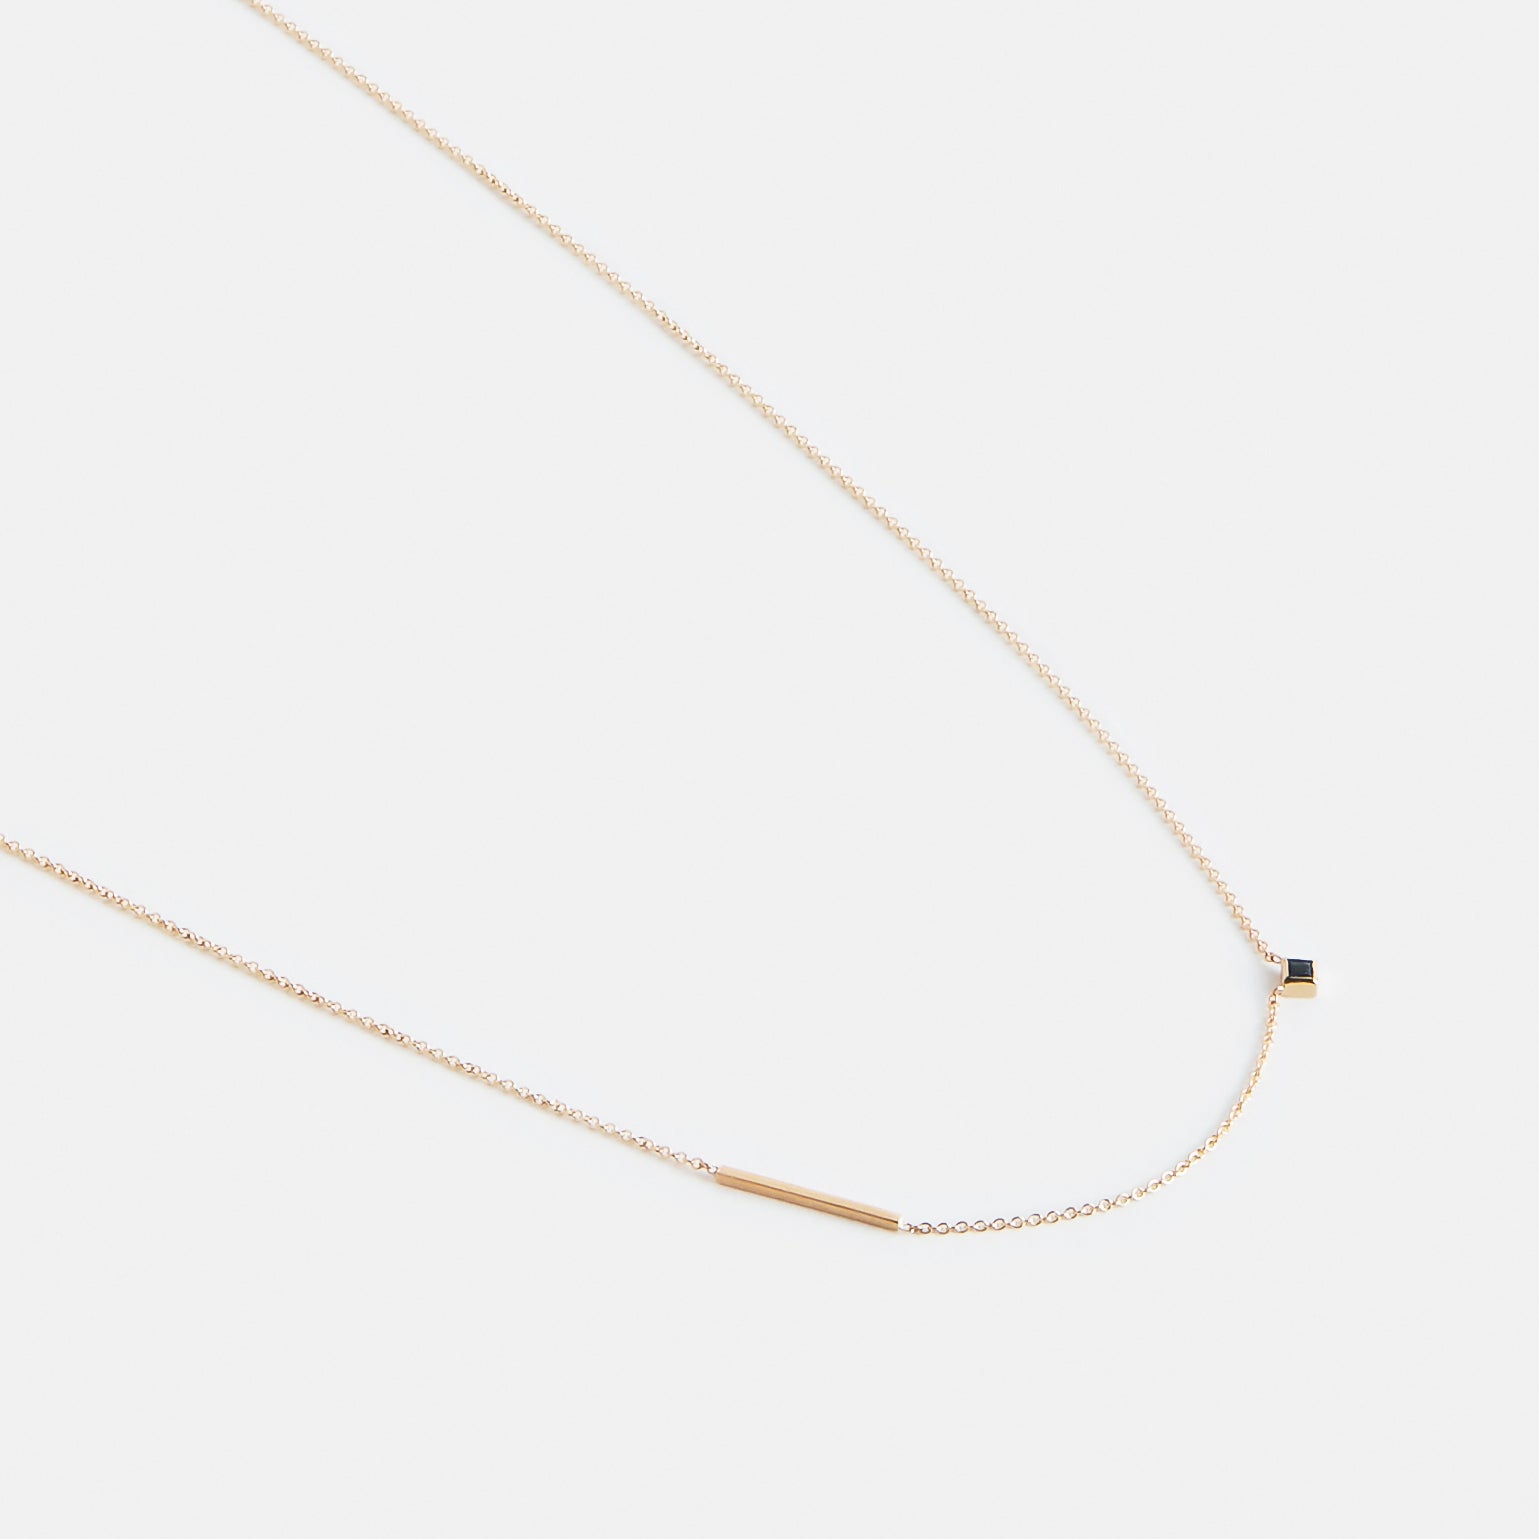 Inu Handmade Necklace in 14k Gold Set with White Diamond By SHW Fine Jewelry New York City